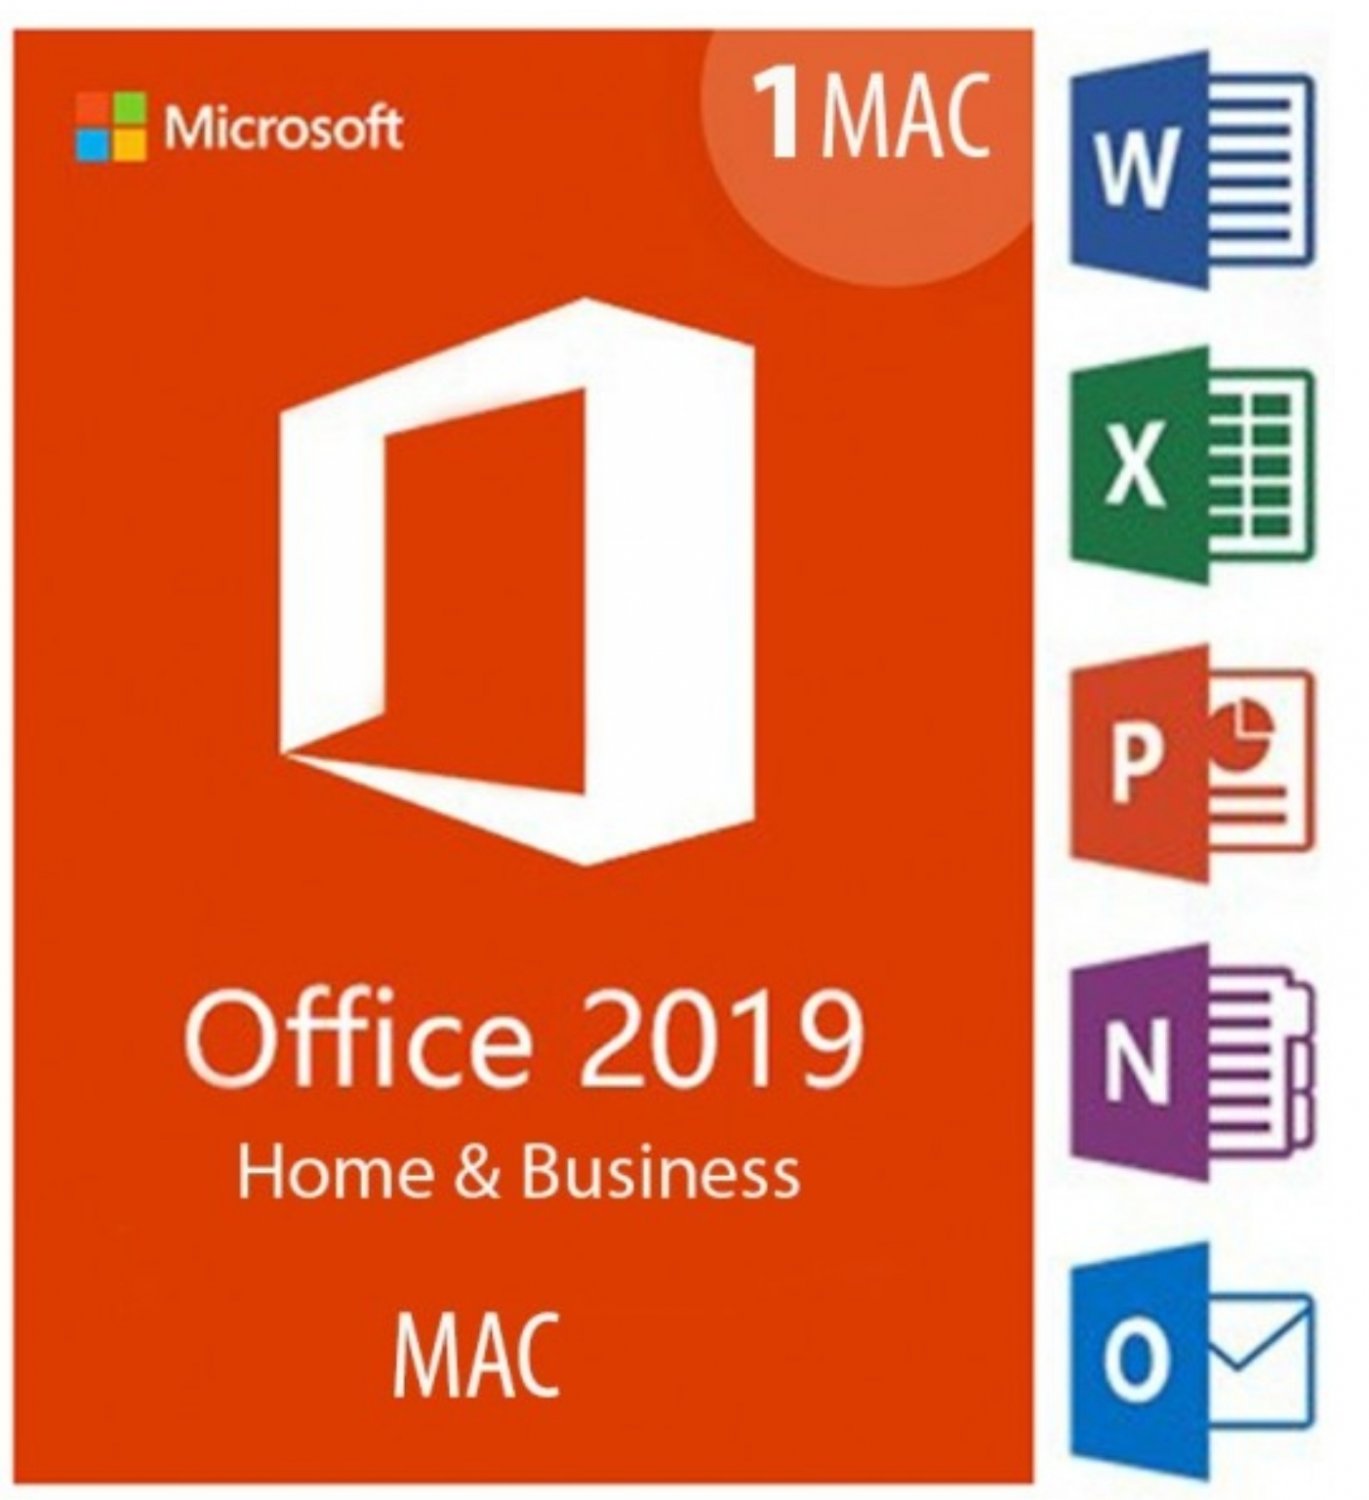 microsoft office home and business 2019 windows 7